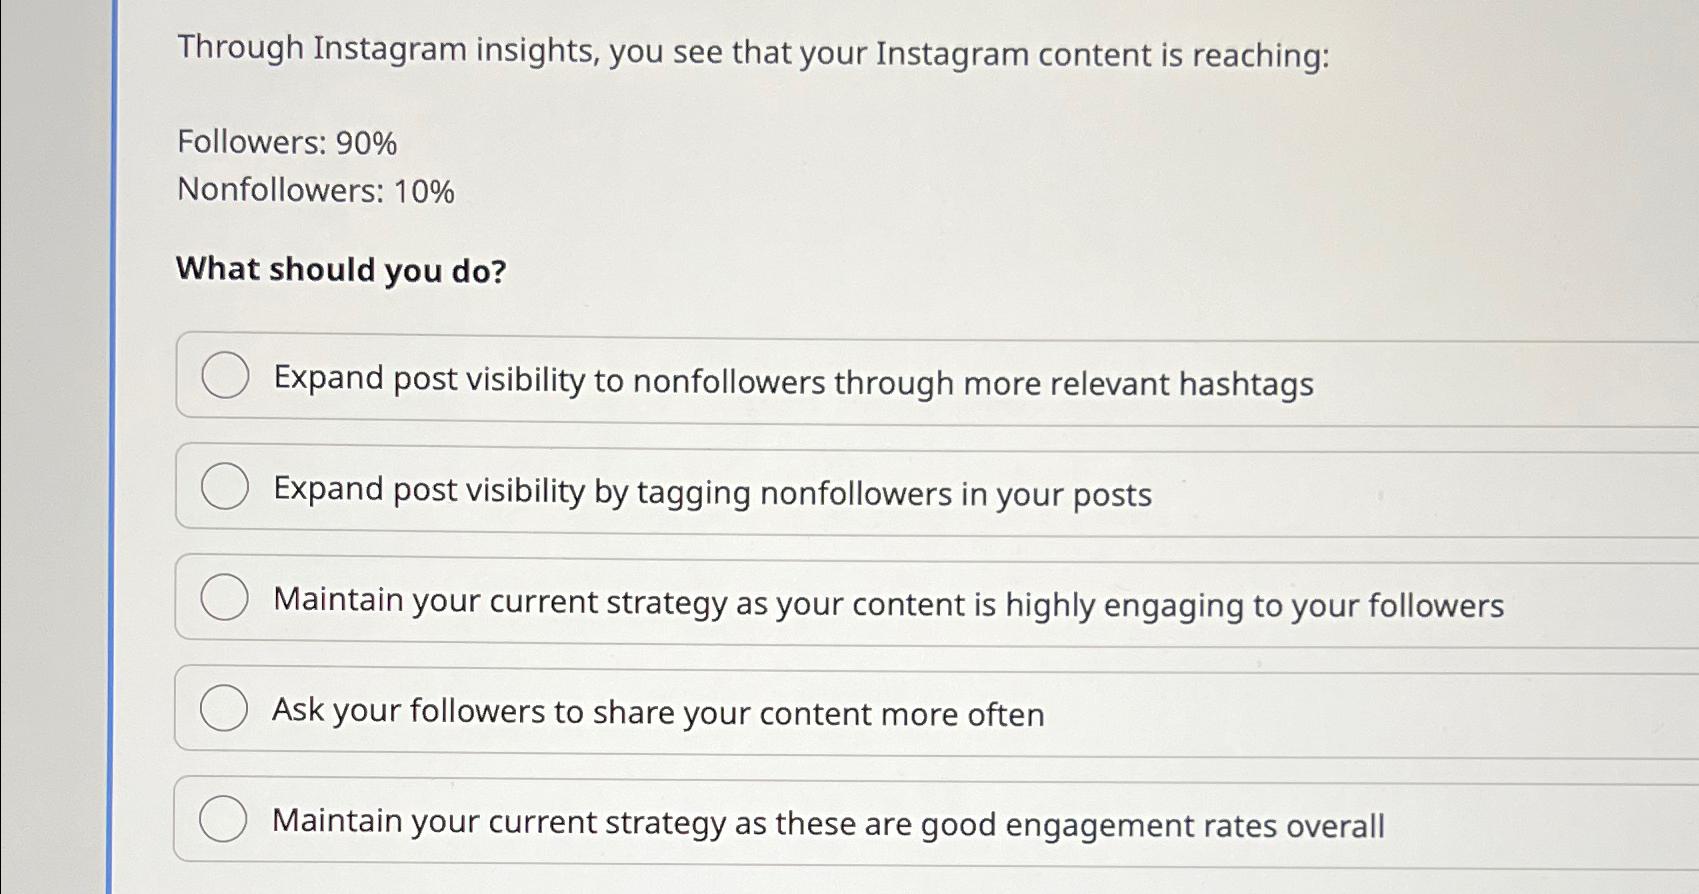 Through Instagram insights, you see that your Instagram content is reaching: Followers: 90% Nonfollowers: 10%